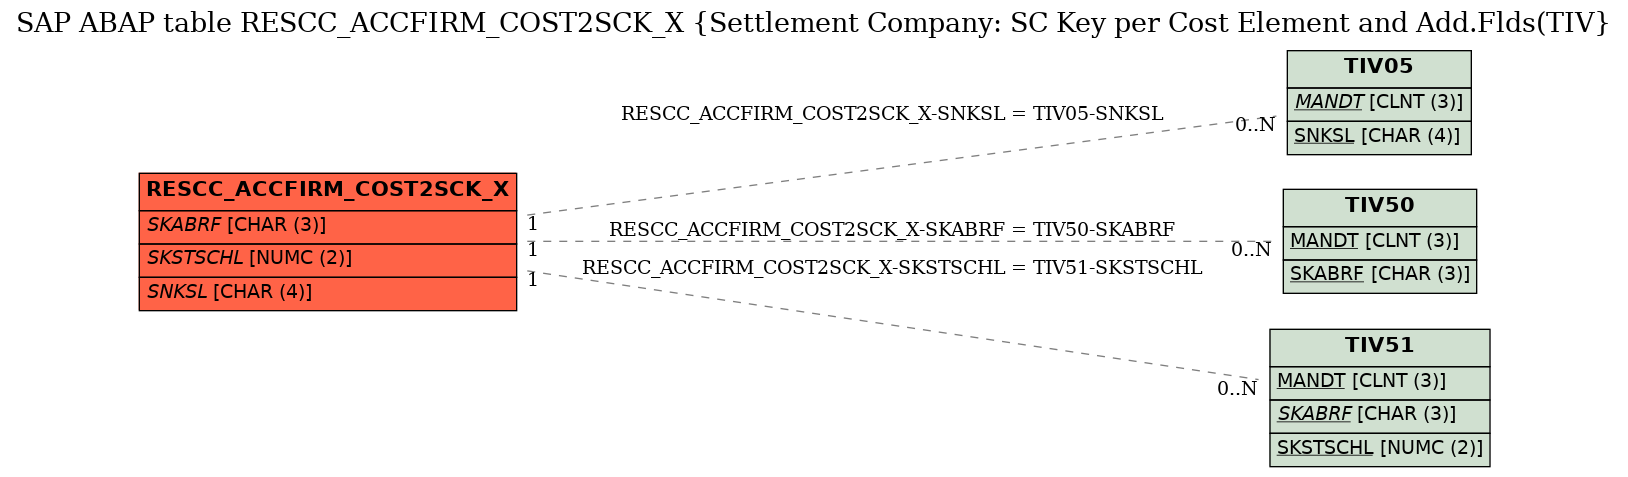 E-R Diagram for table RESCC_ACCFIRM_COST2SCK_X (Settlement Company: SC Key per Cost Element and Add.Flds(TIV)